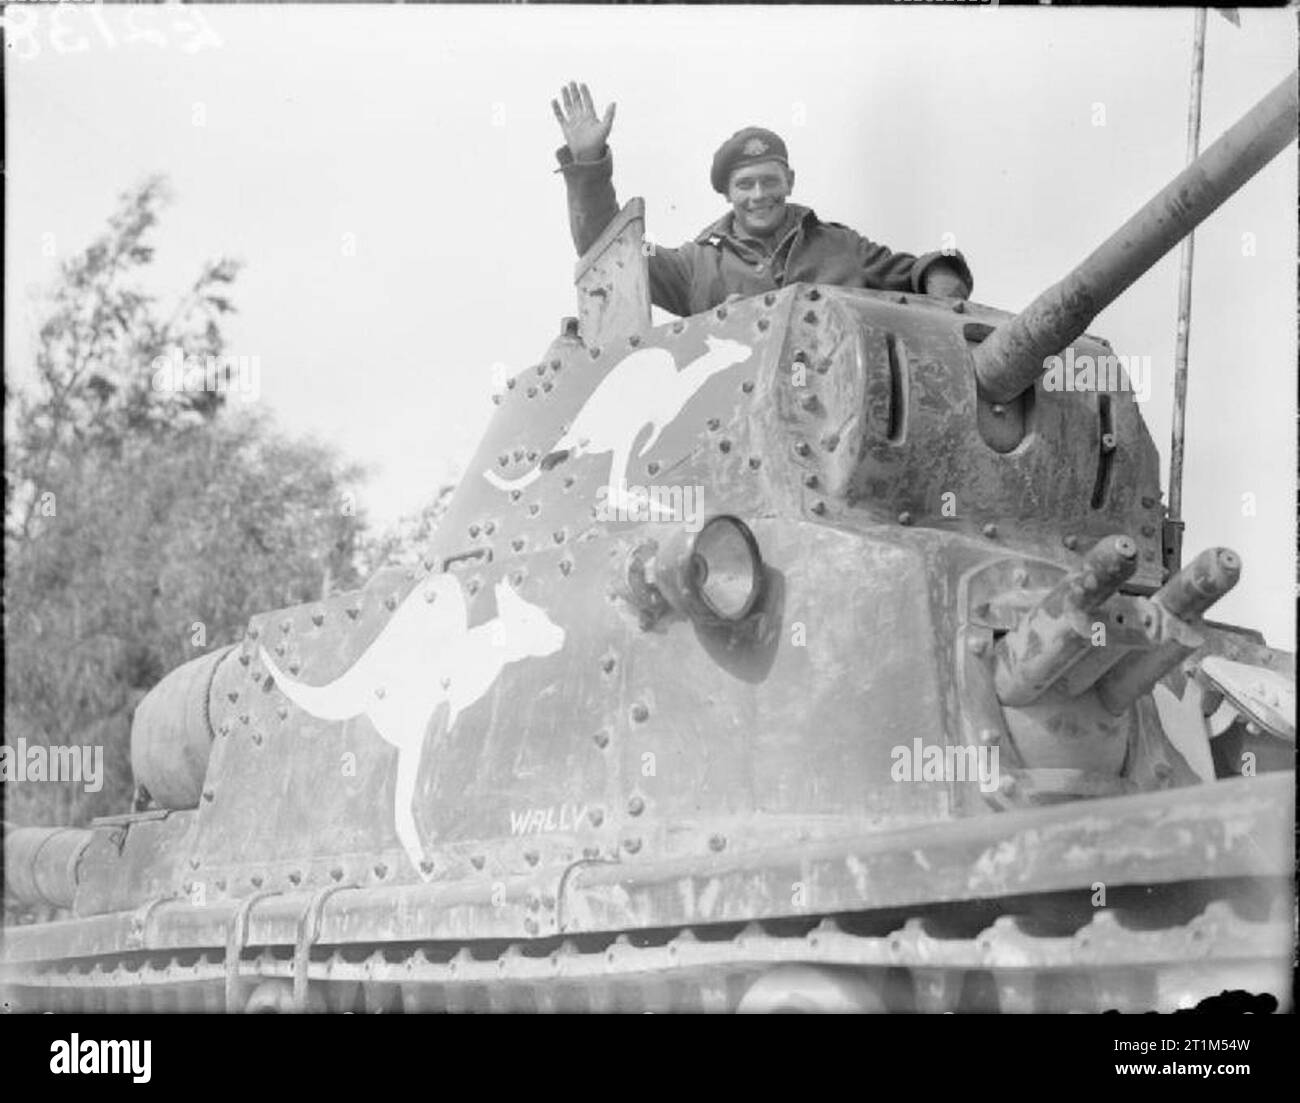 The British Army in North Africa 1941 An Italian M13/40 tank captured by the 6th Australian Divisional Cavalry in Cyrenaica, Libya, 4 March 1941. The Australians painted the kangaroos on the side in order to prevent possible mistakes. Stock Photo